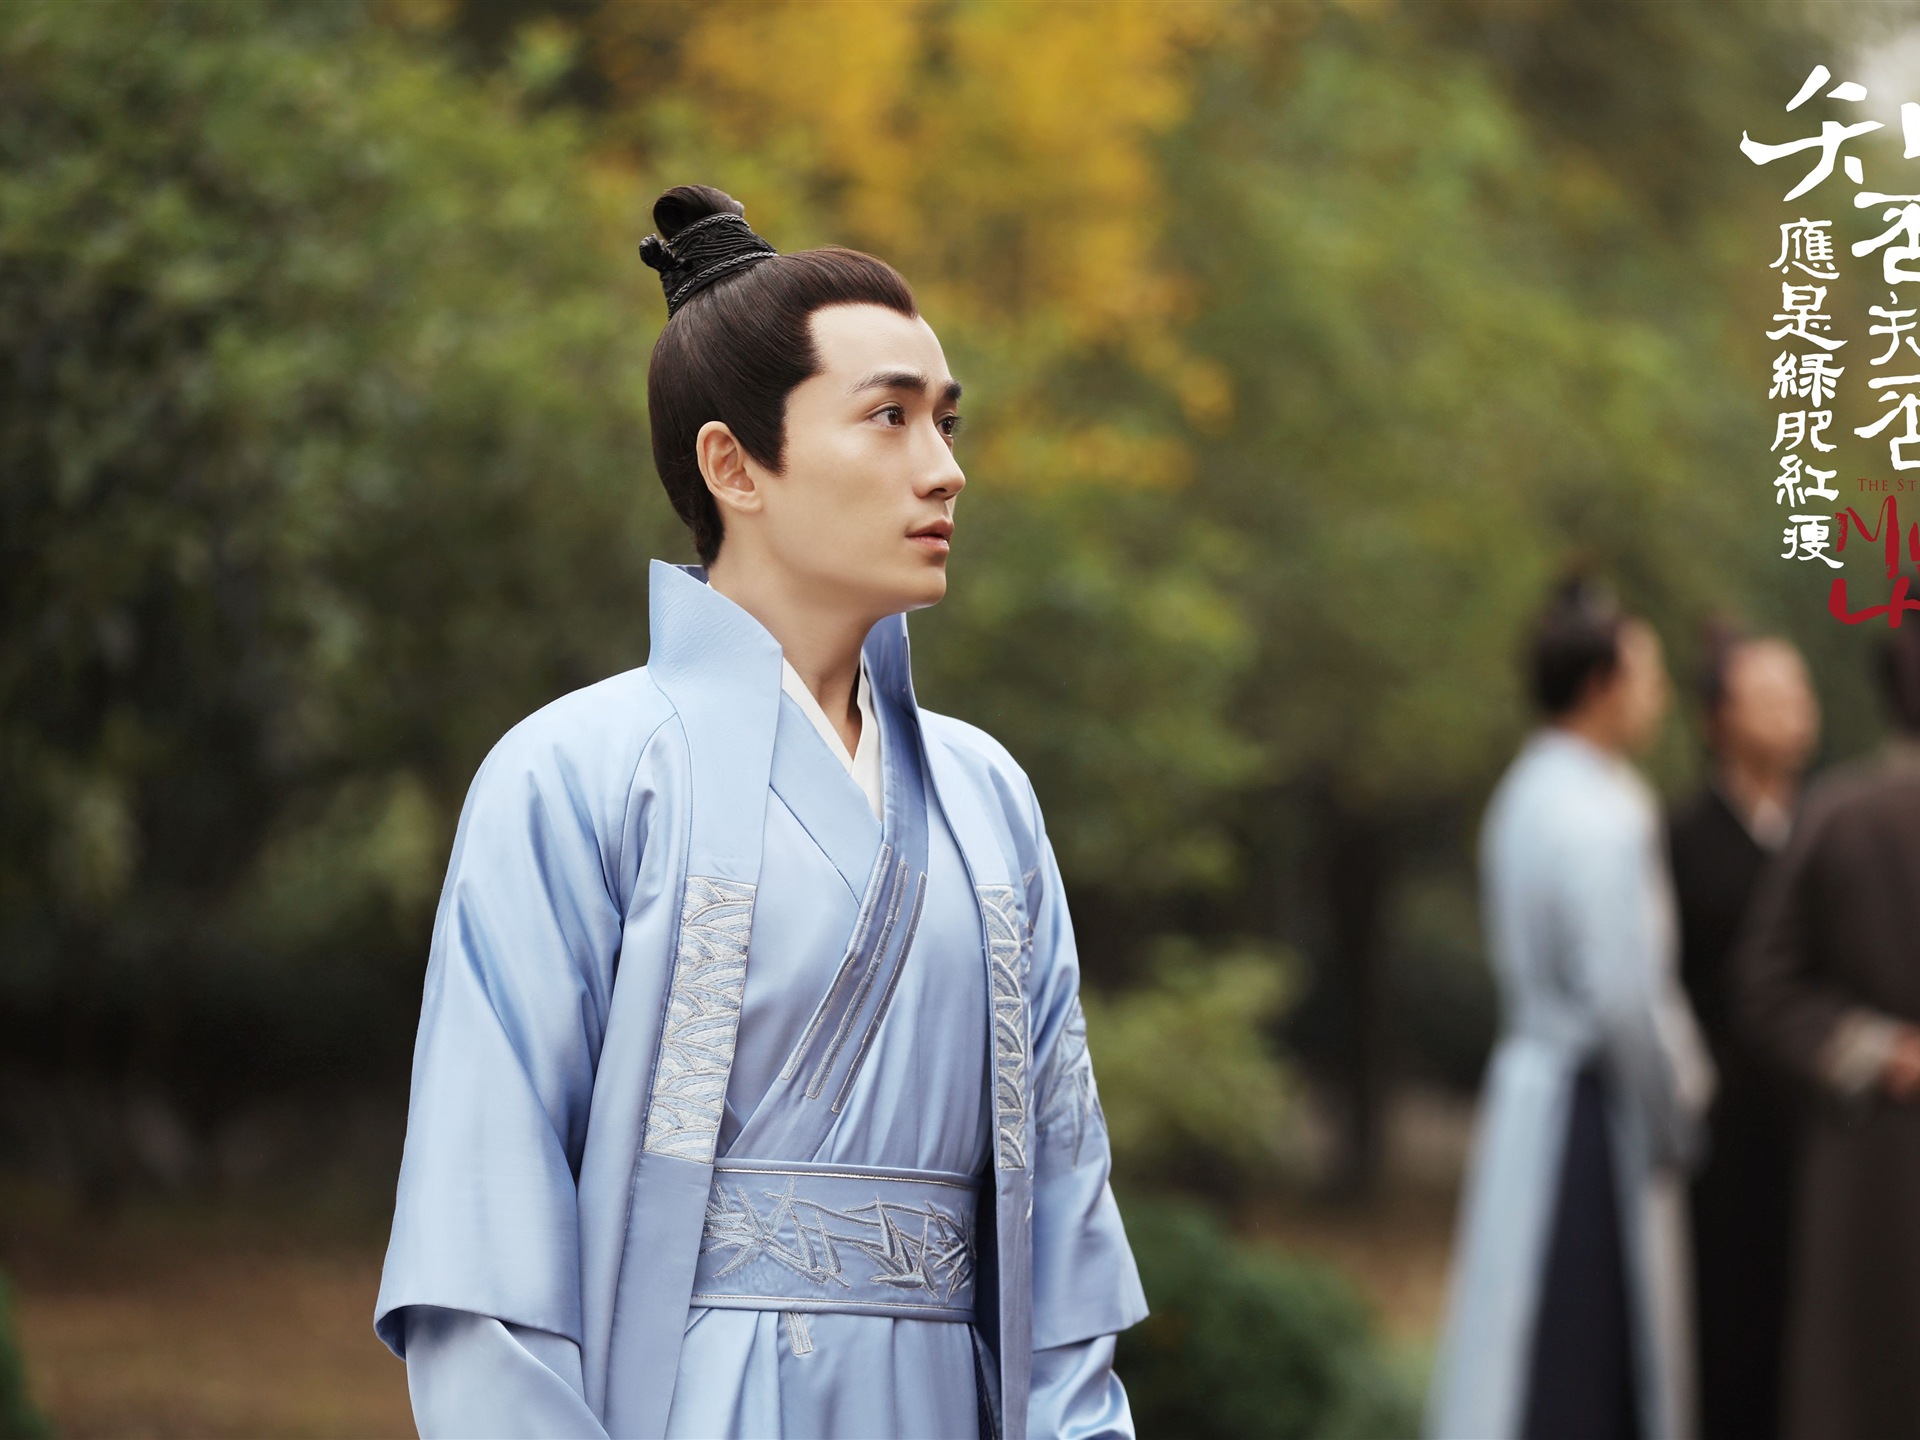 The Story Of MingLan, TV series HD wallpapers #55 - 1920x1440